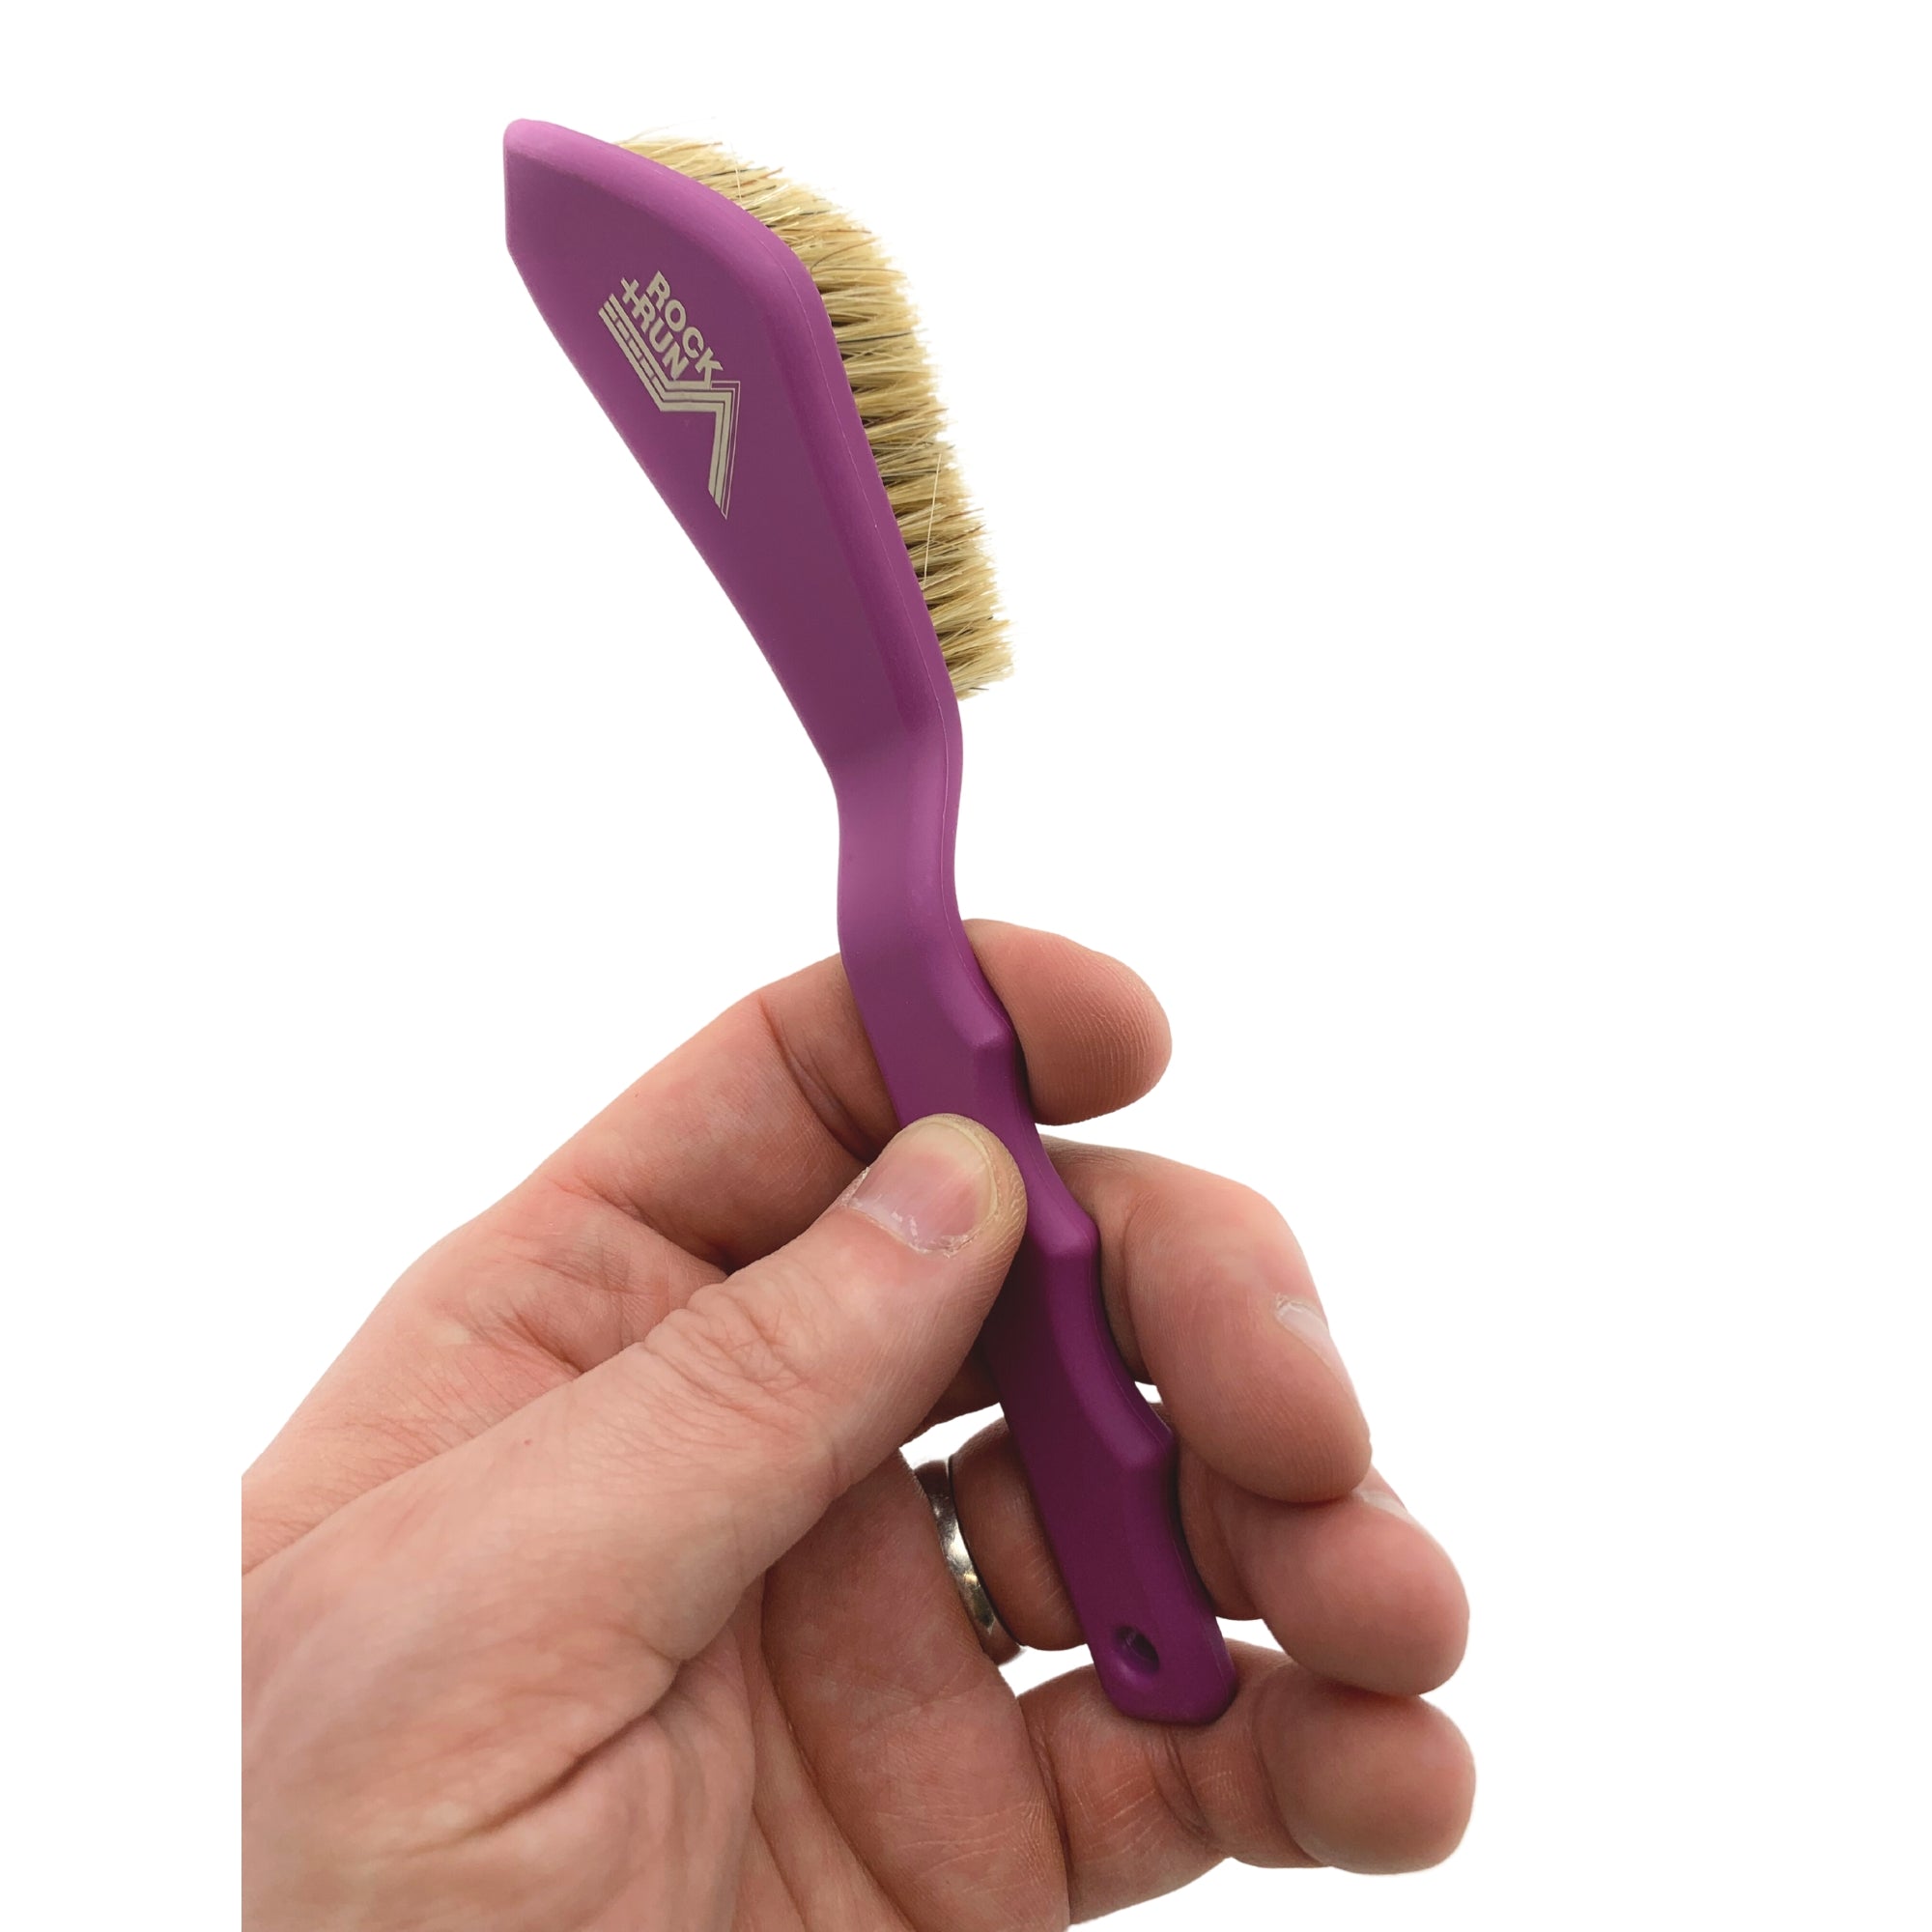 Rock + Run Shaped Boars Hair Brush in white and purple